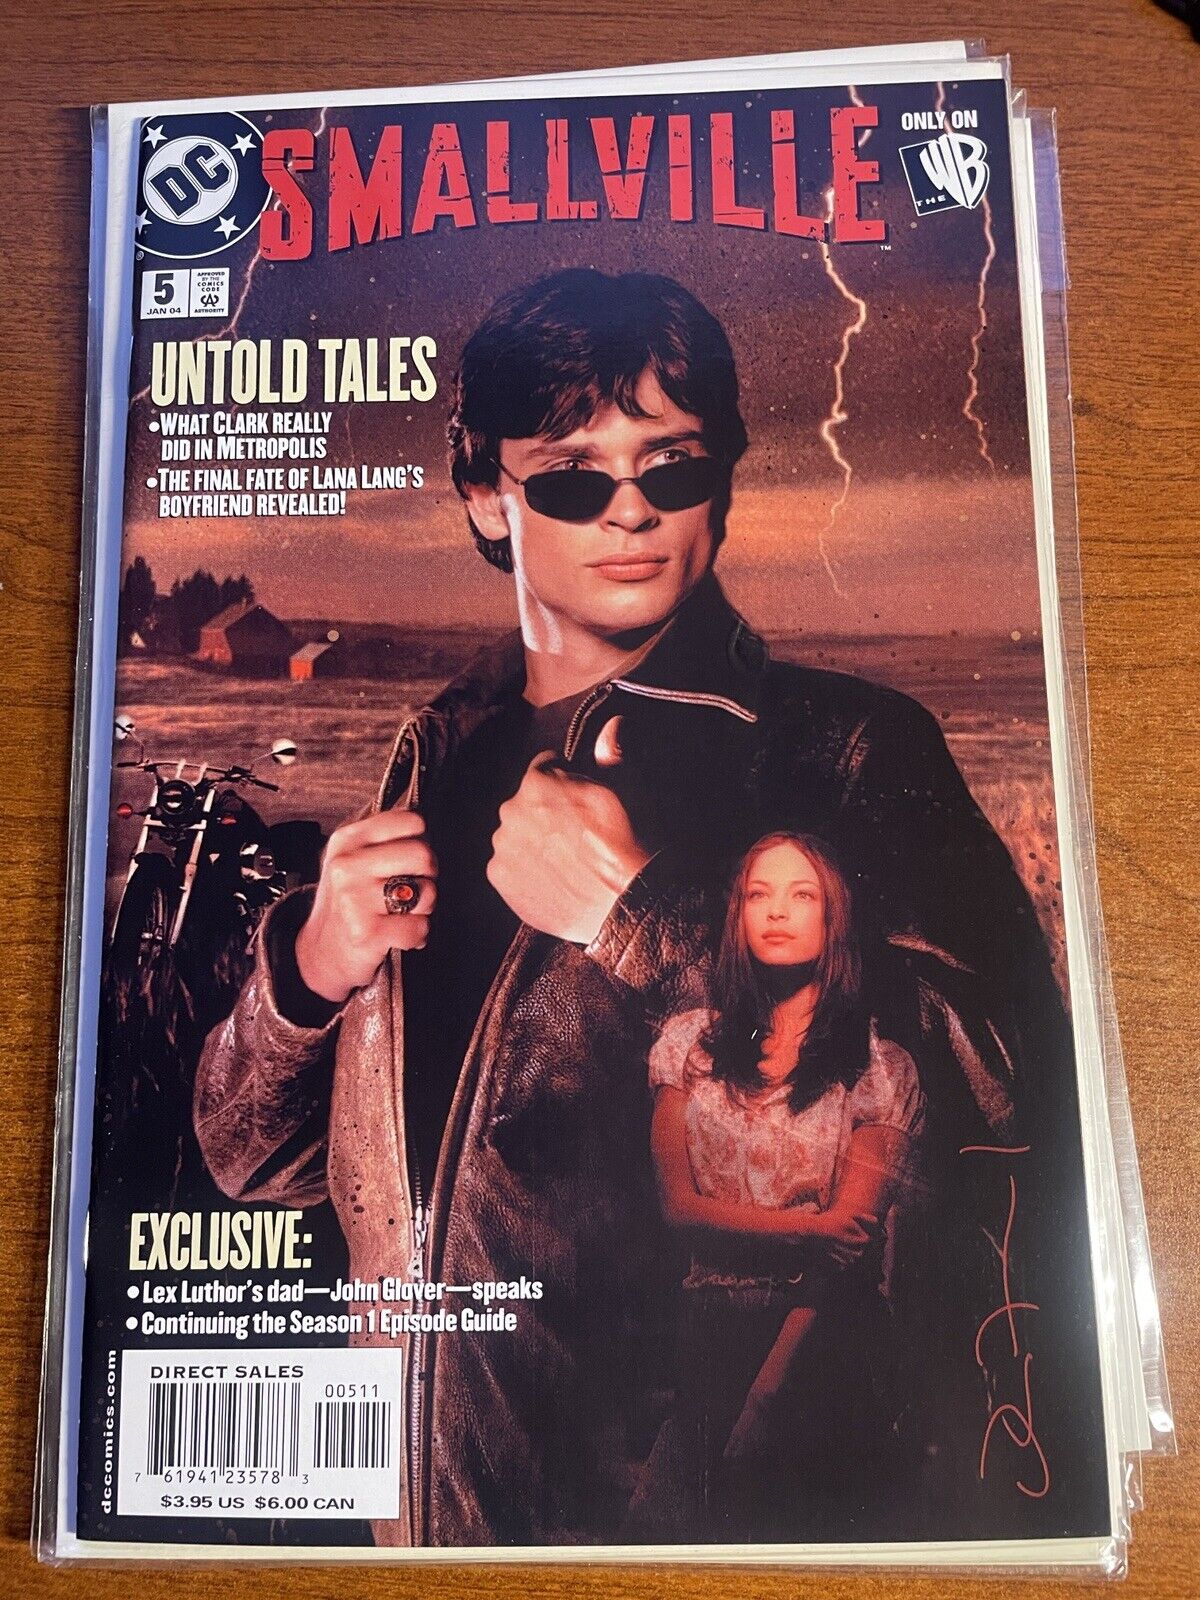 Smallville 5 (NM) Tom Welling Photo cover 2003 DC Comics